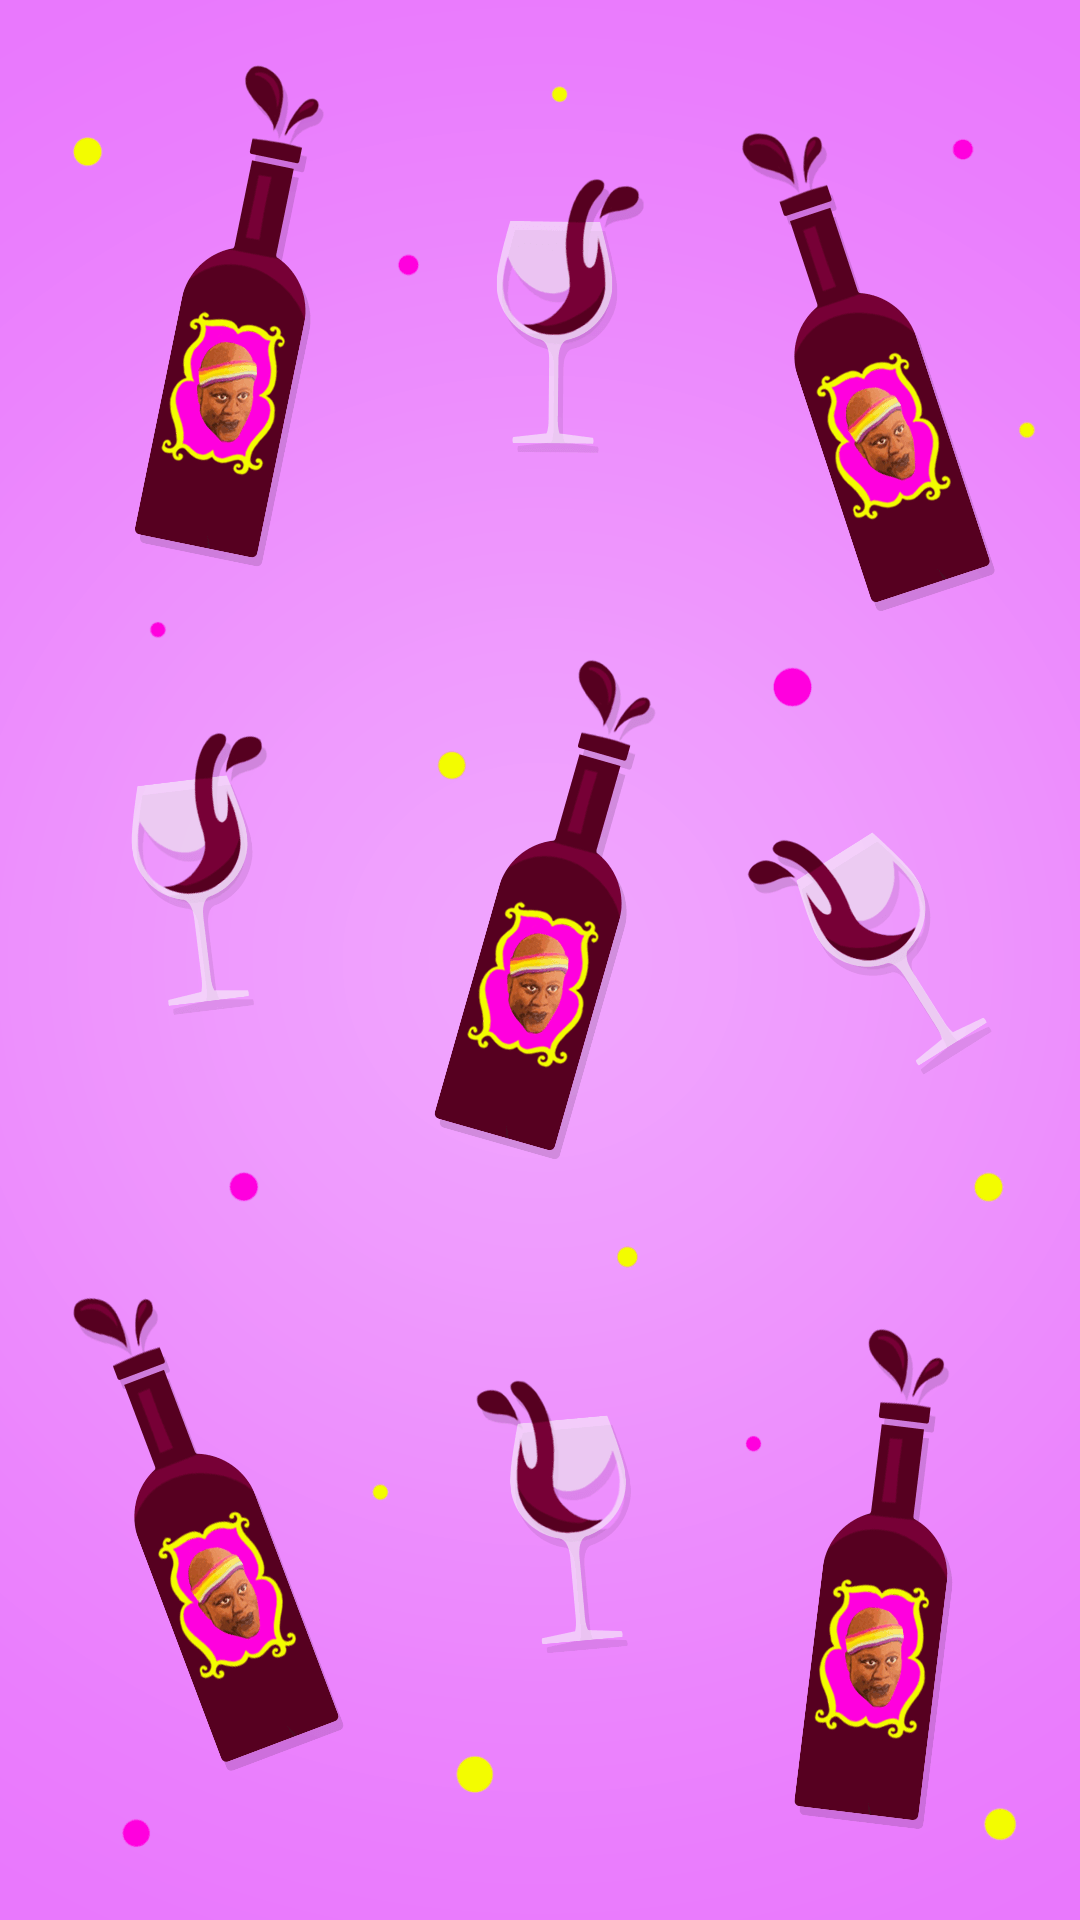 Kimmy Schmidt Mobile Wallpaper. Photography and film